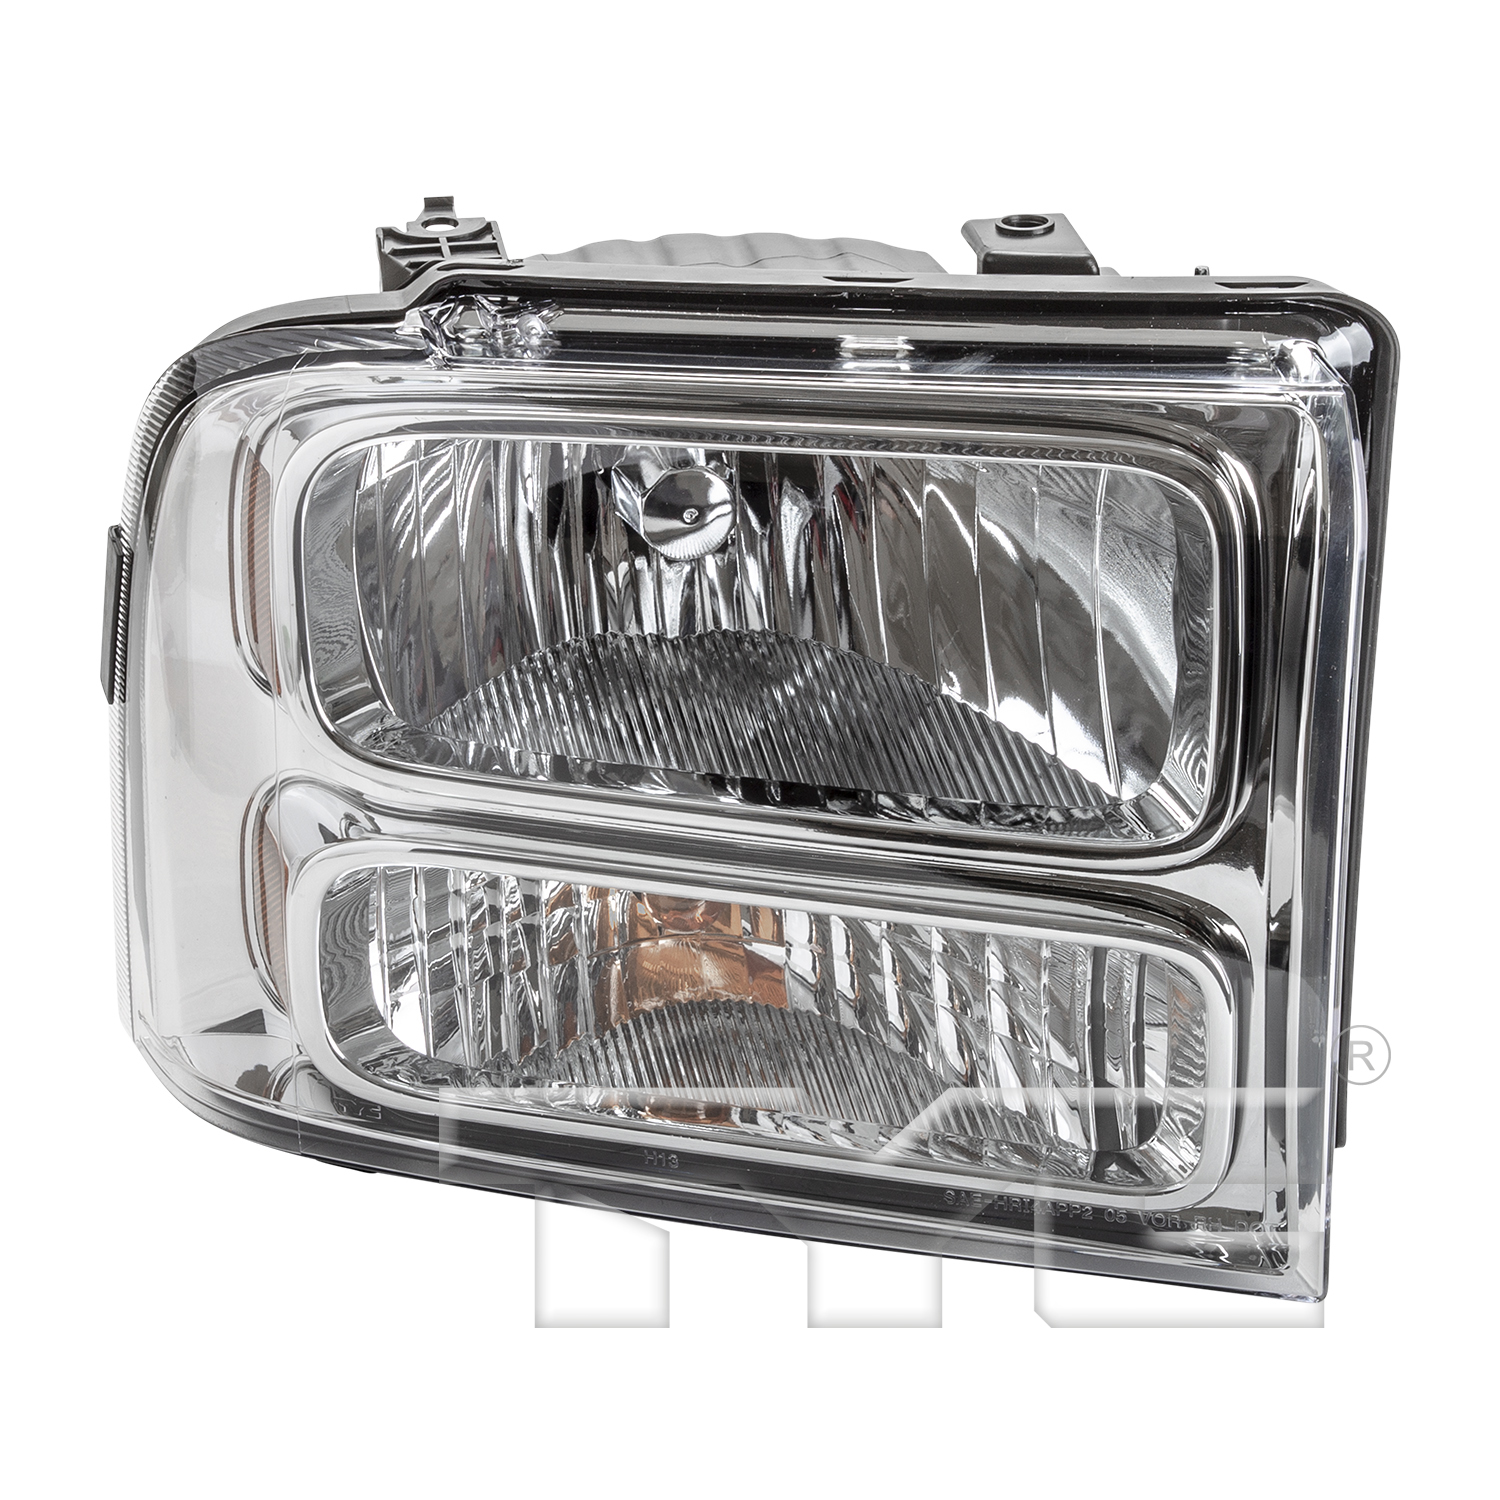 Aftermarket HEADLIGHTS for FORD - F-350 SUPER DUTY, F-350 SUPER DUTY,06-07,RT Headlamp assy composite